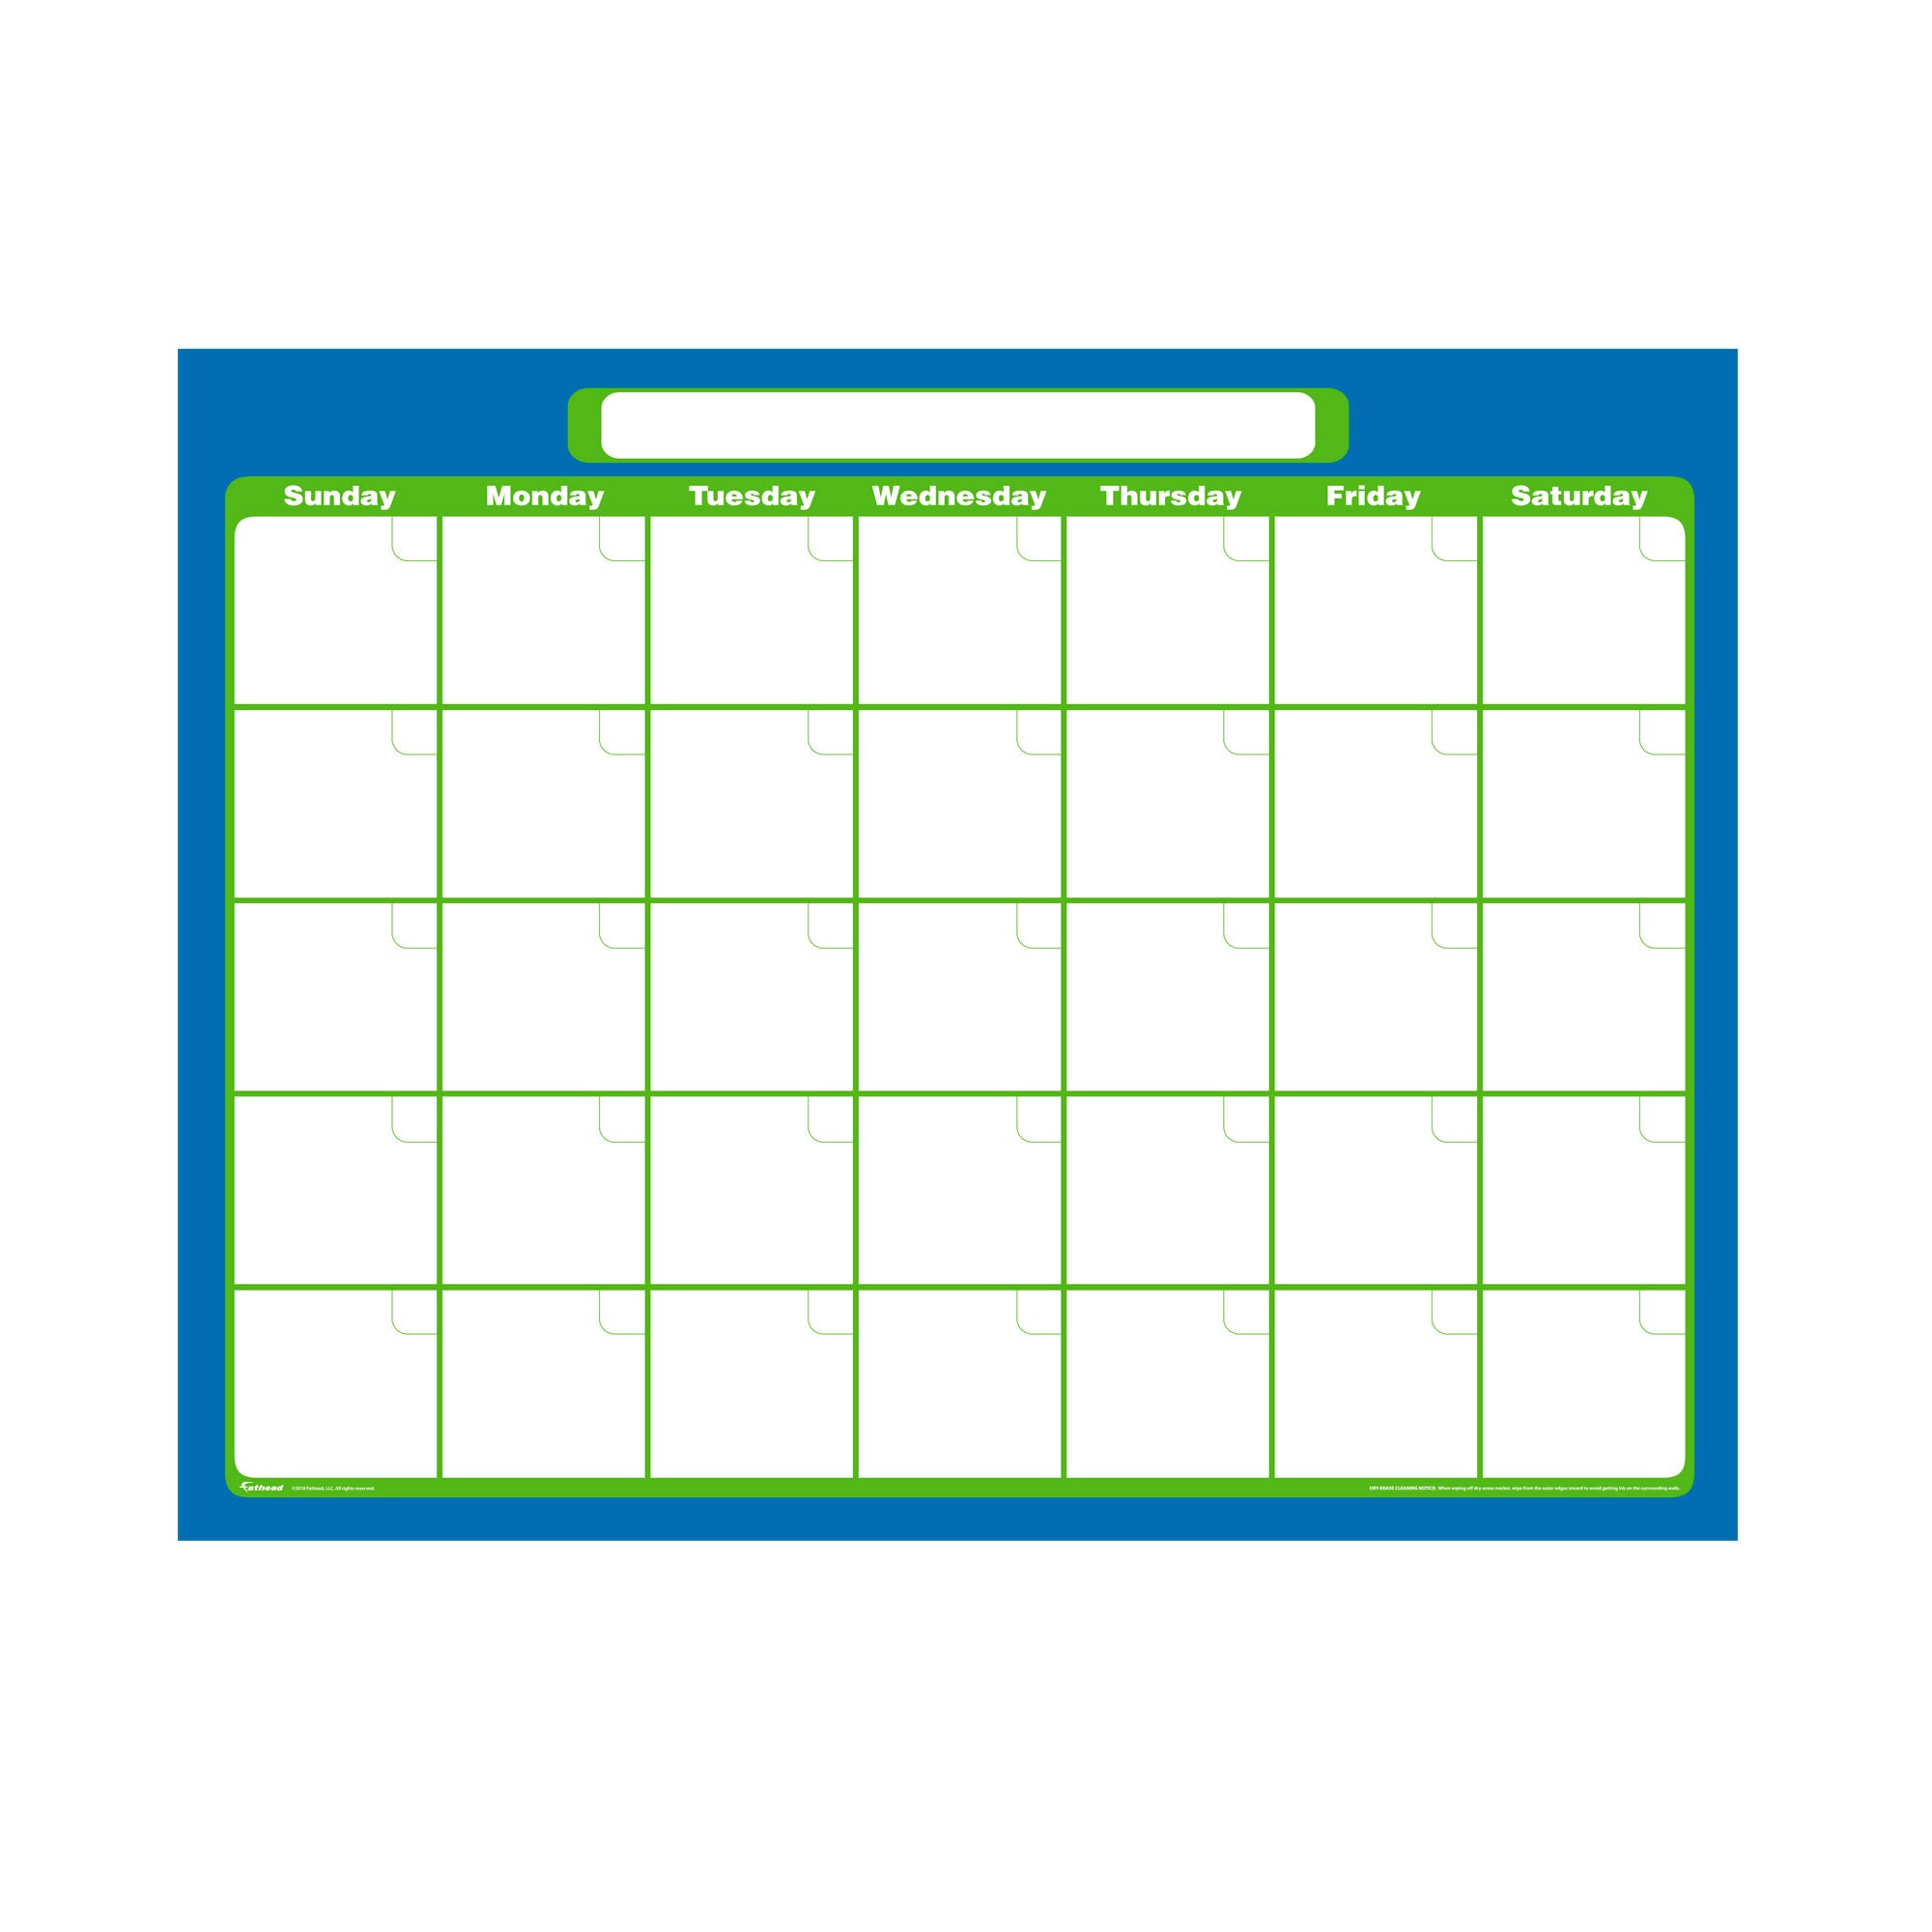 One Month Calendar Dry Erase Removable Wall Adhesive Decal in Brown/Blue 27"W x 39.5"H by Fathead | Vinyl